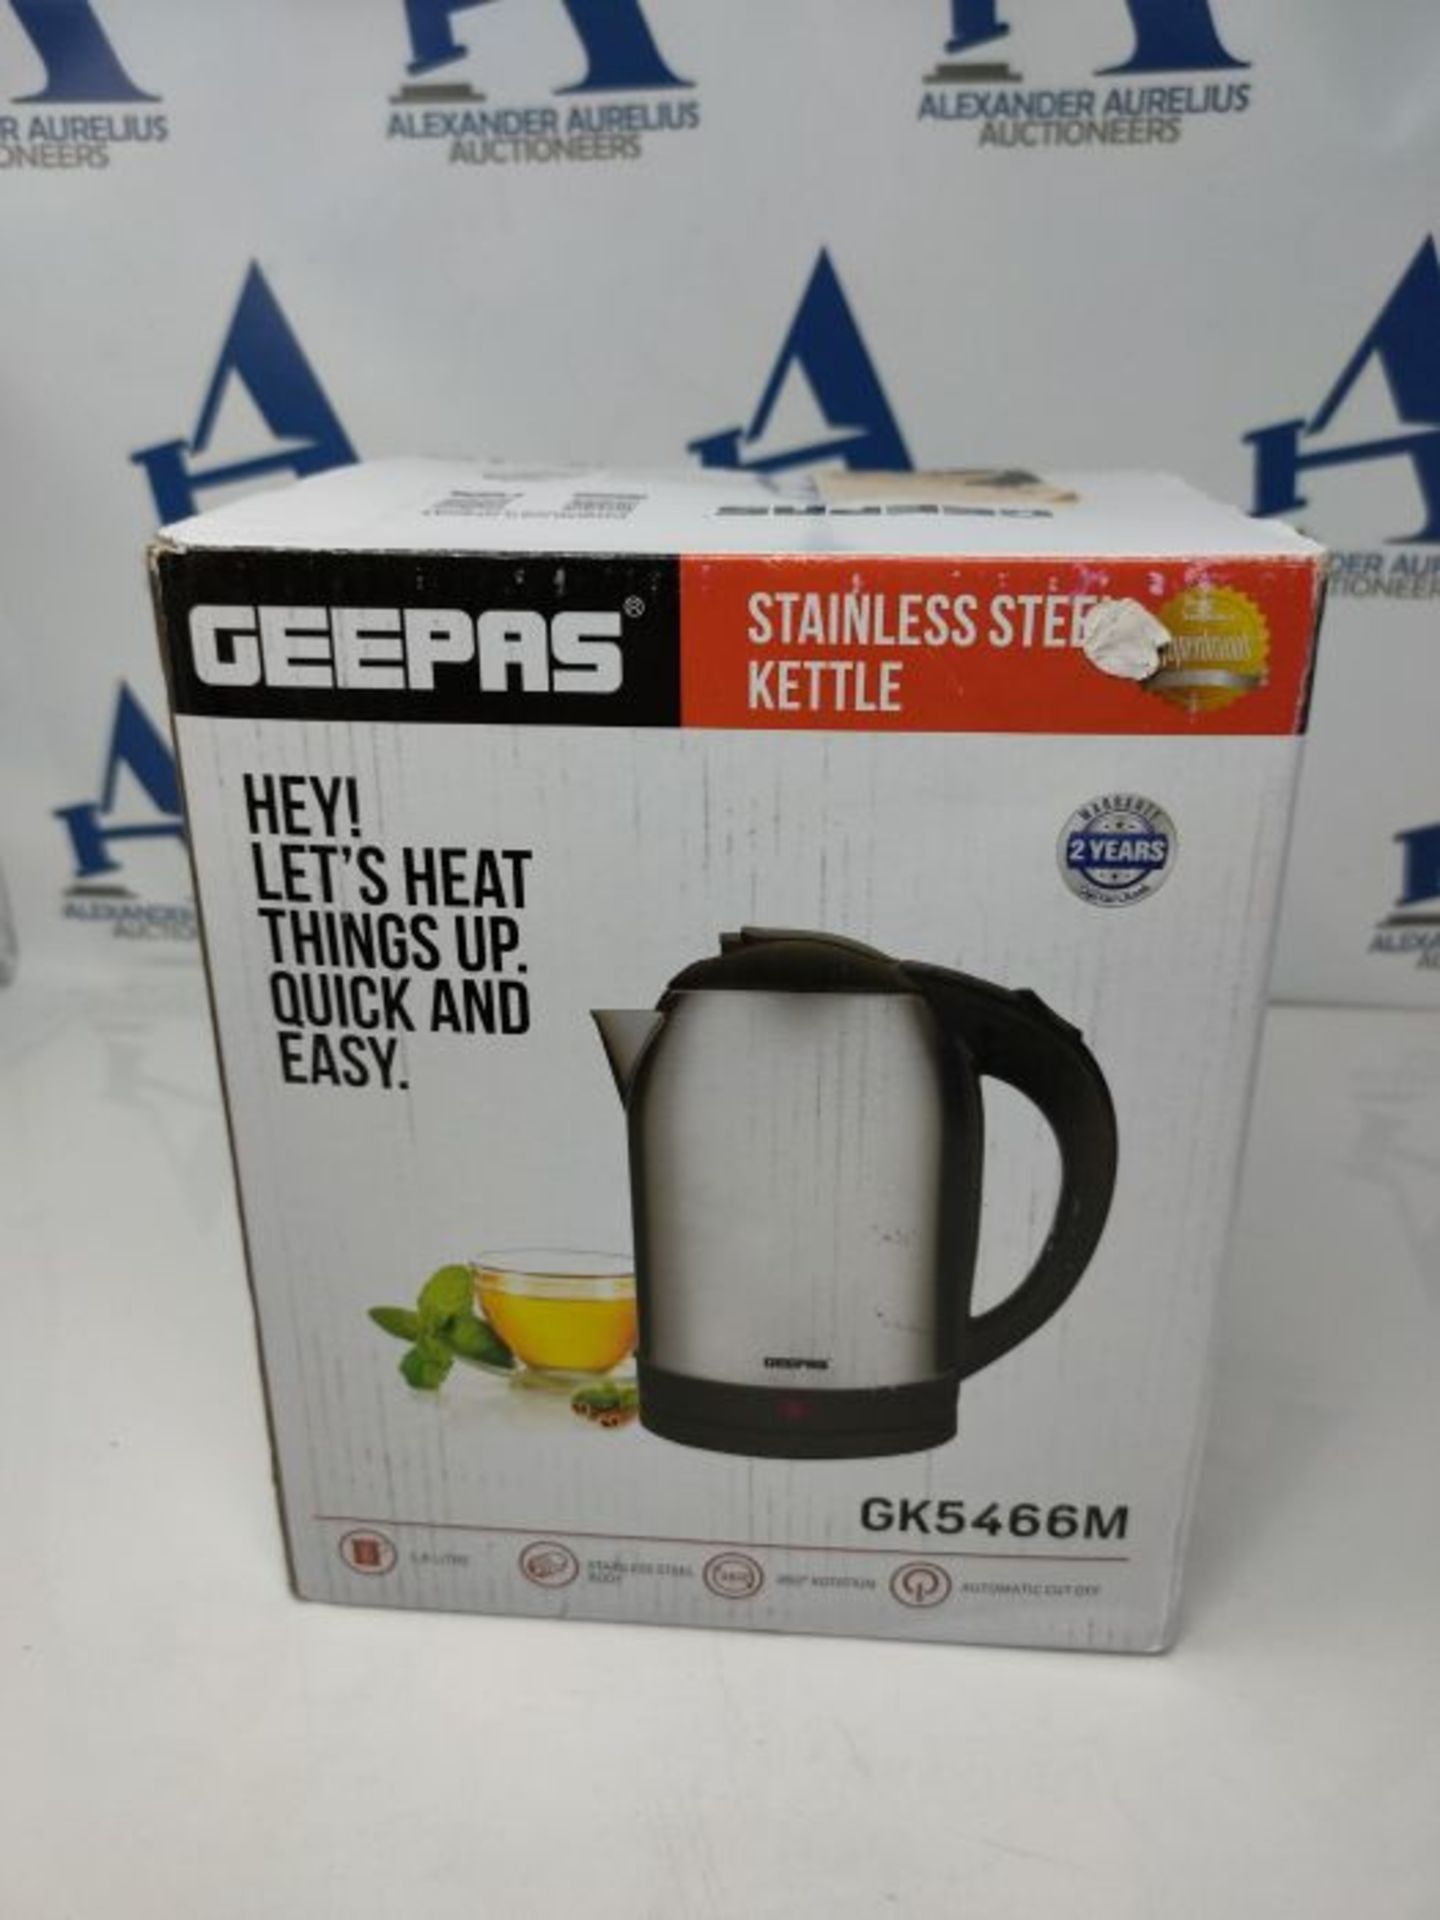 Geepas Electric Kettle, 1500W | Stainless Steel Cordless Kettle | Boil Dry Protection - Image 2 of 3